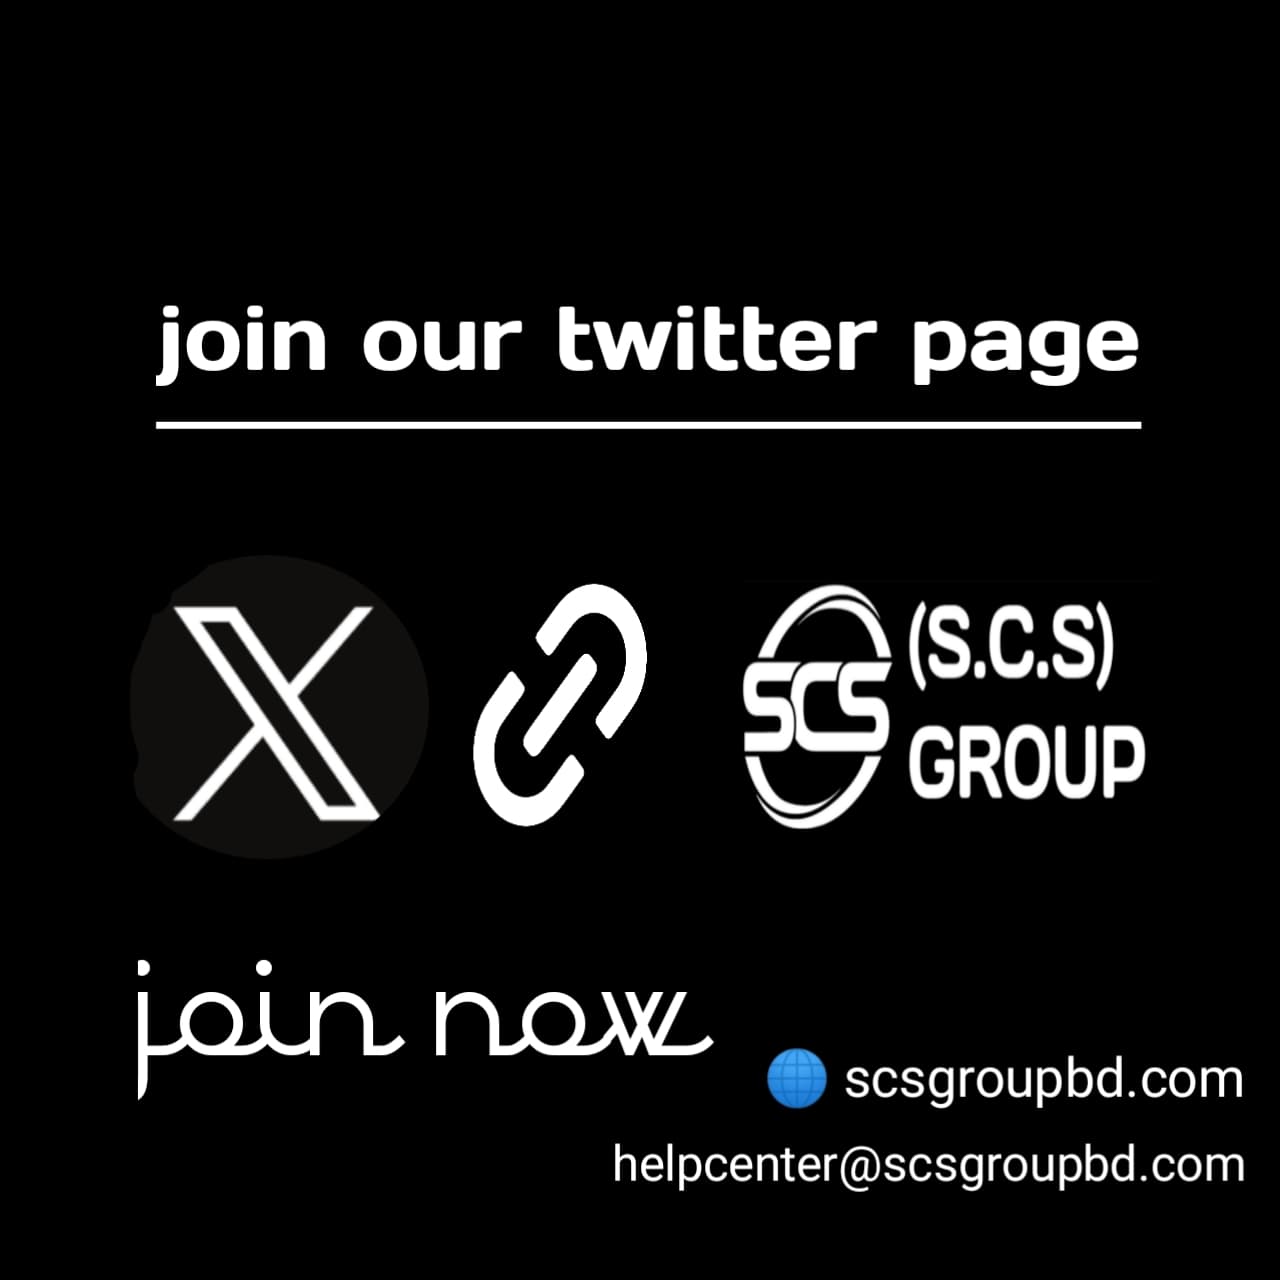 Join SCS group twitter page 